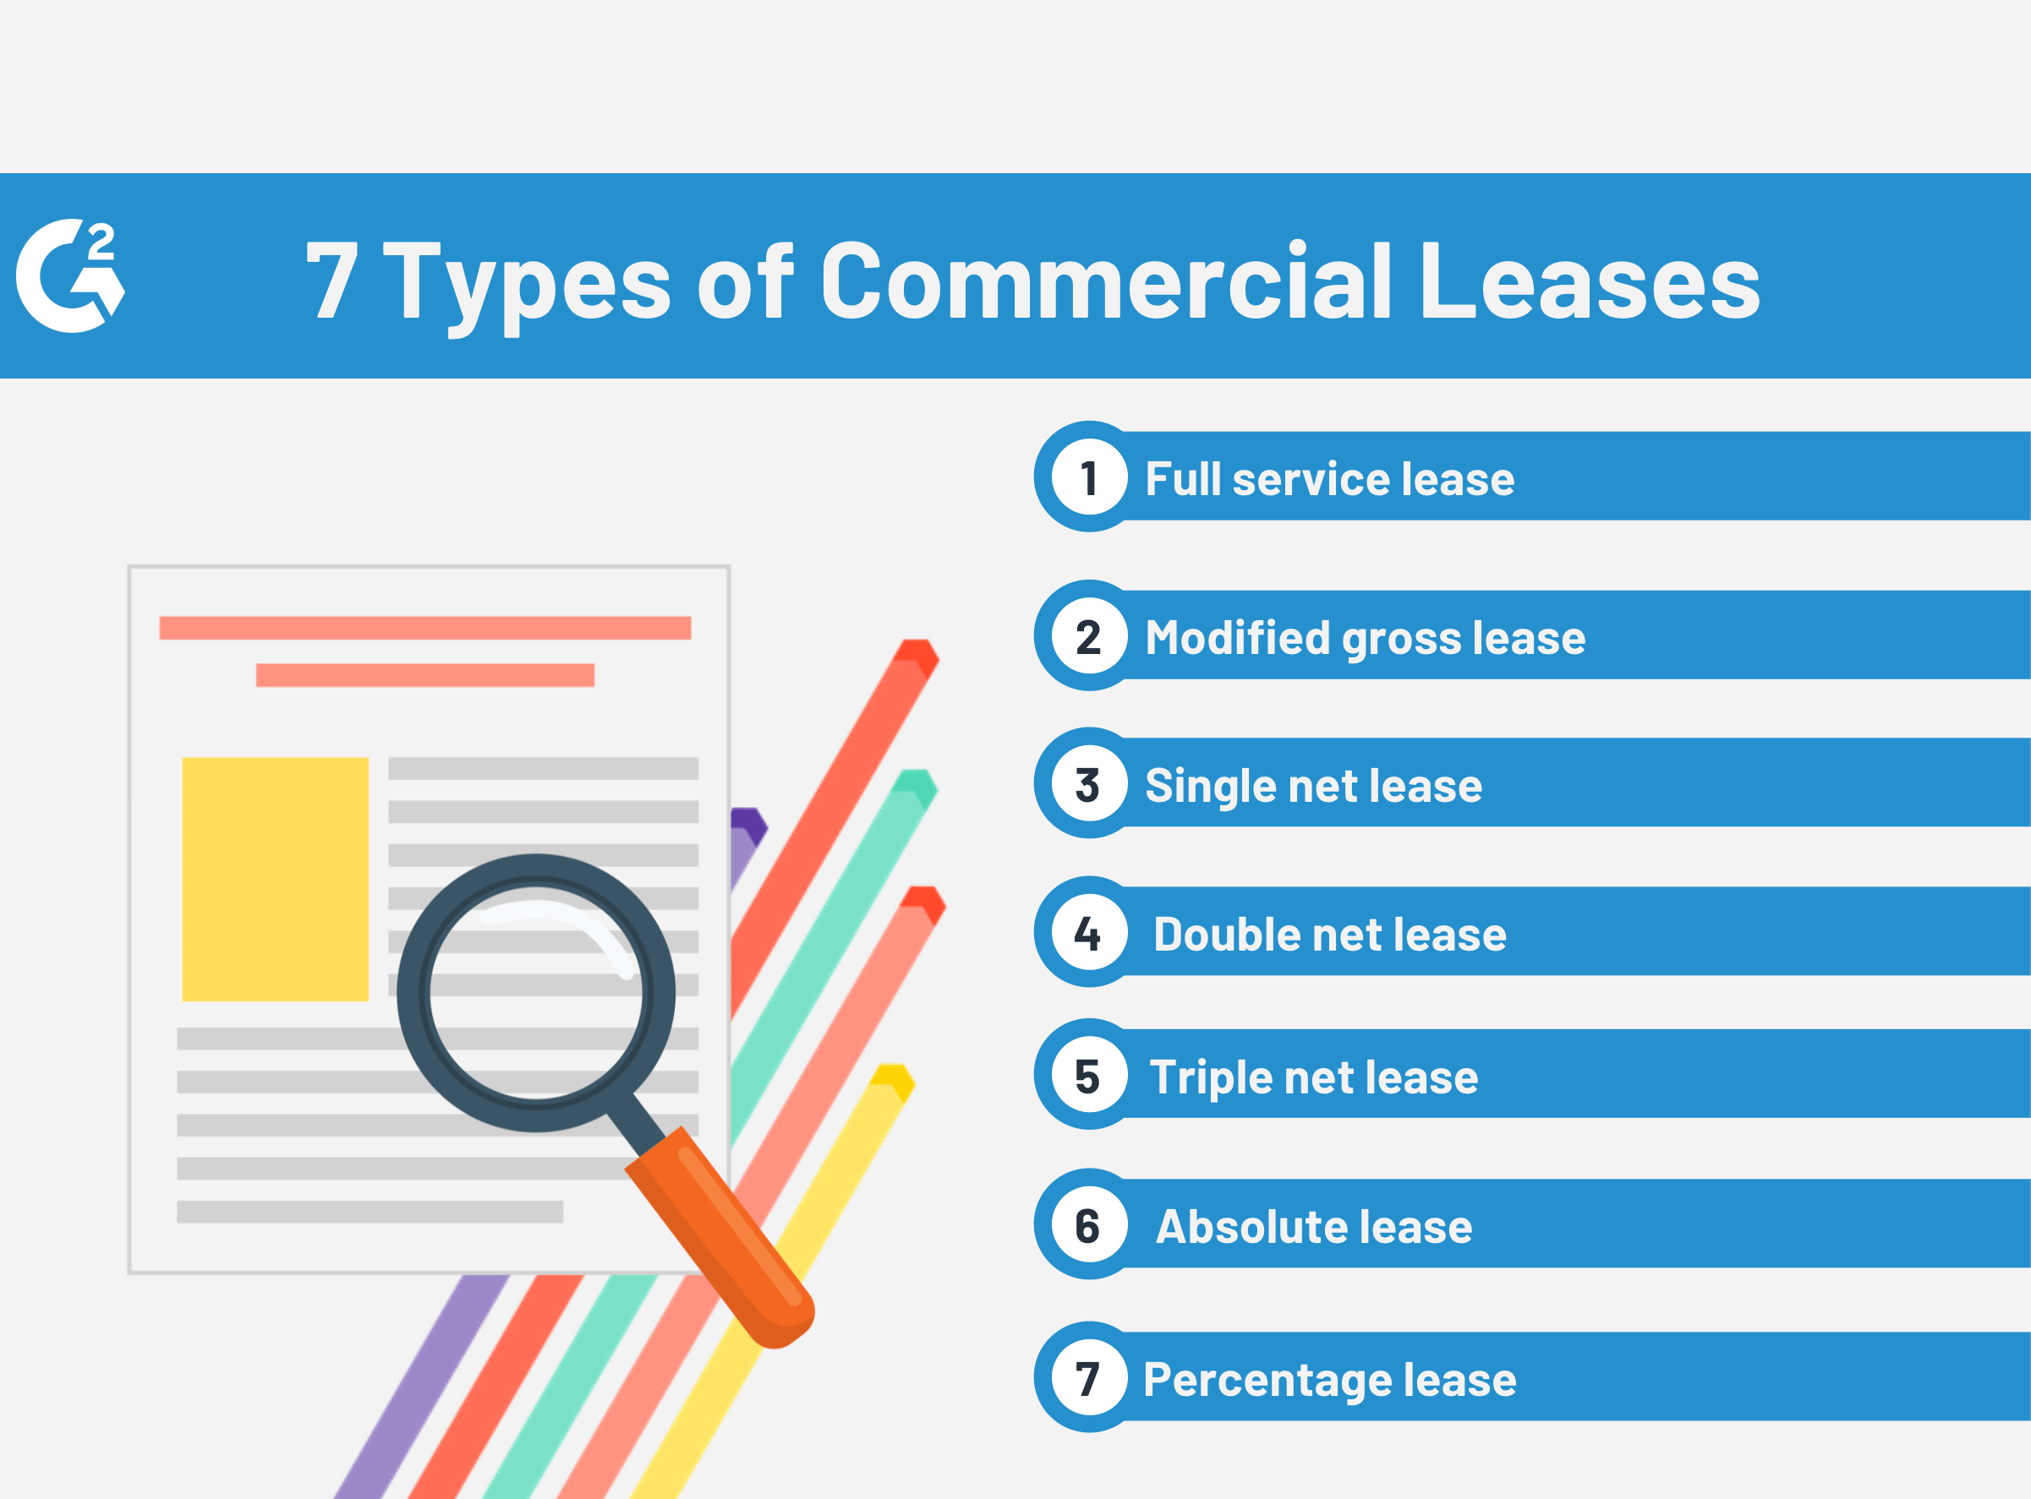 what is a full service lease in commercial real estate